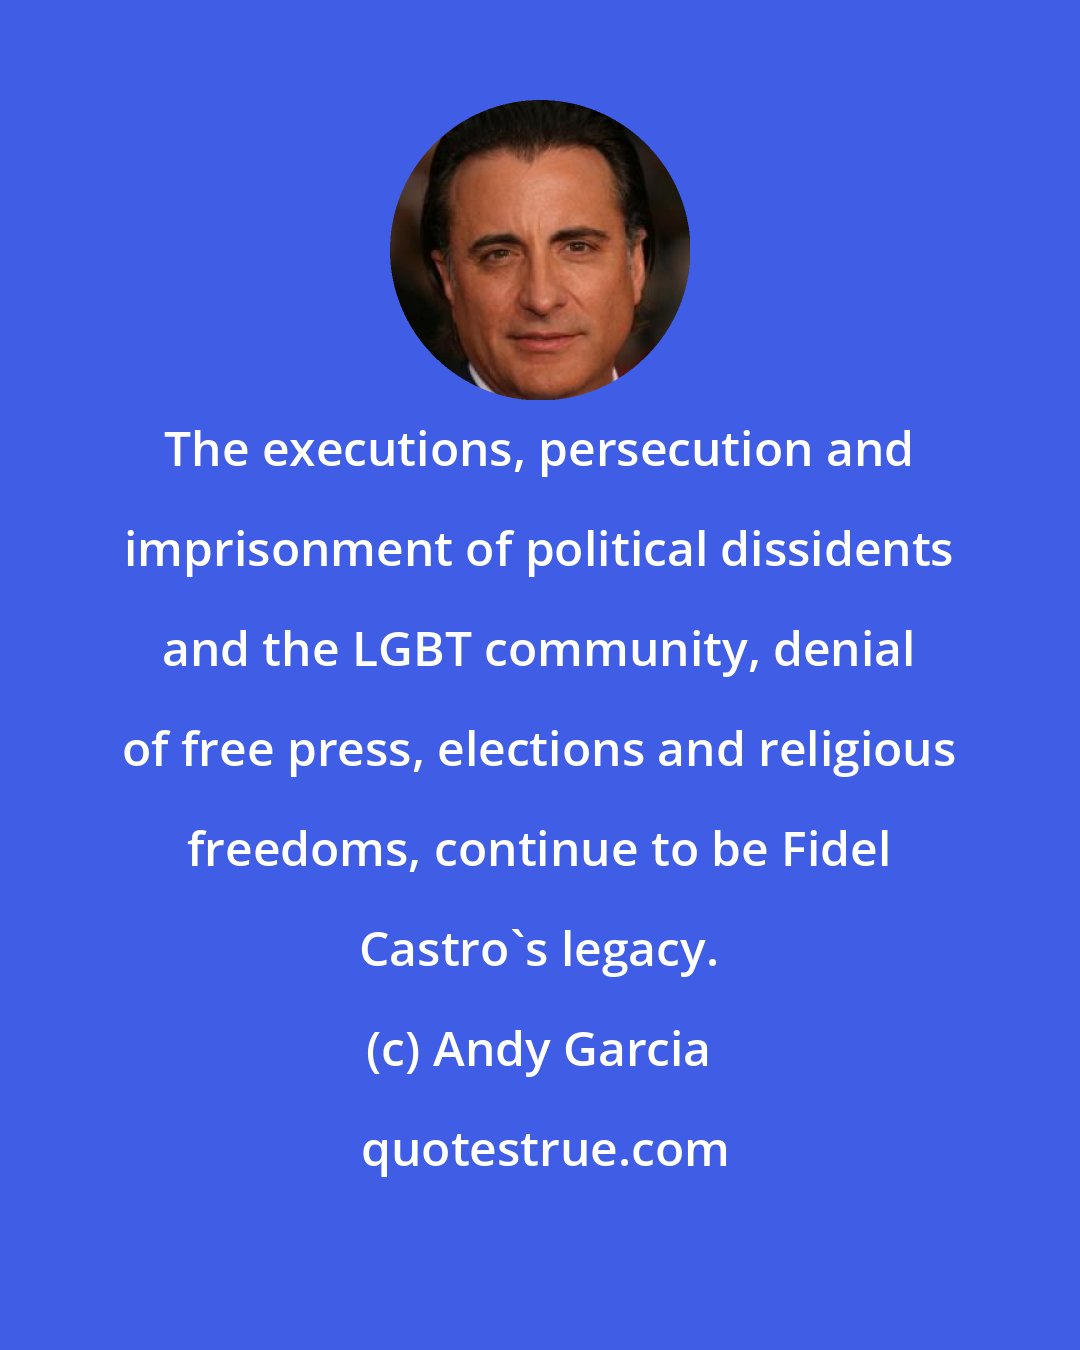 Andy Garcia: The executions, persecution and imprisonment of political dissidents and the LGBT community, denial of free press, elections and religious freedoms, continue to be Fidel Castro's legacy.